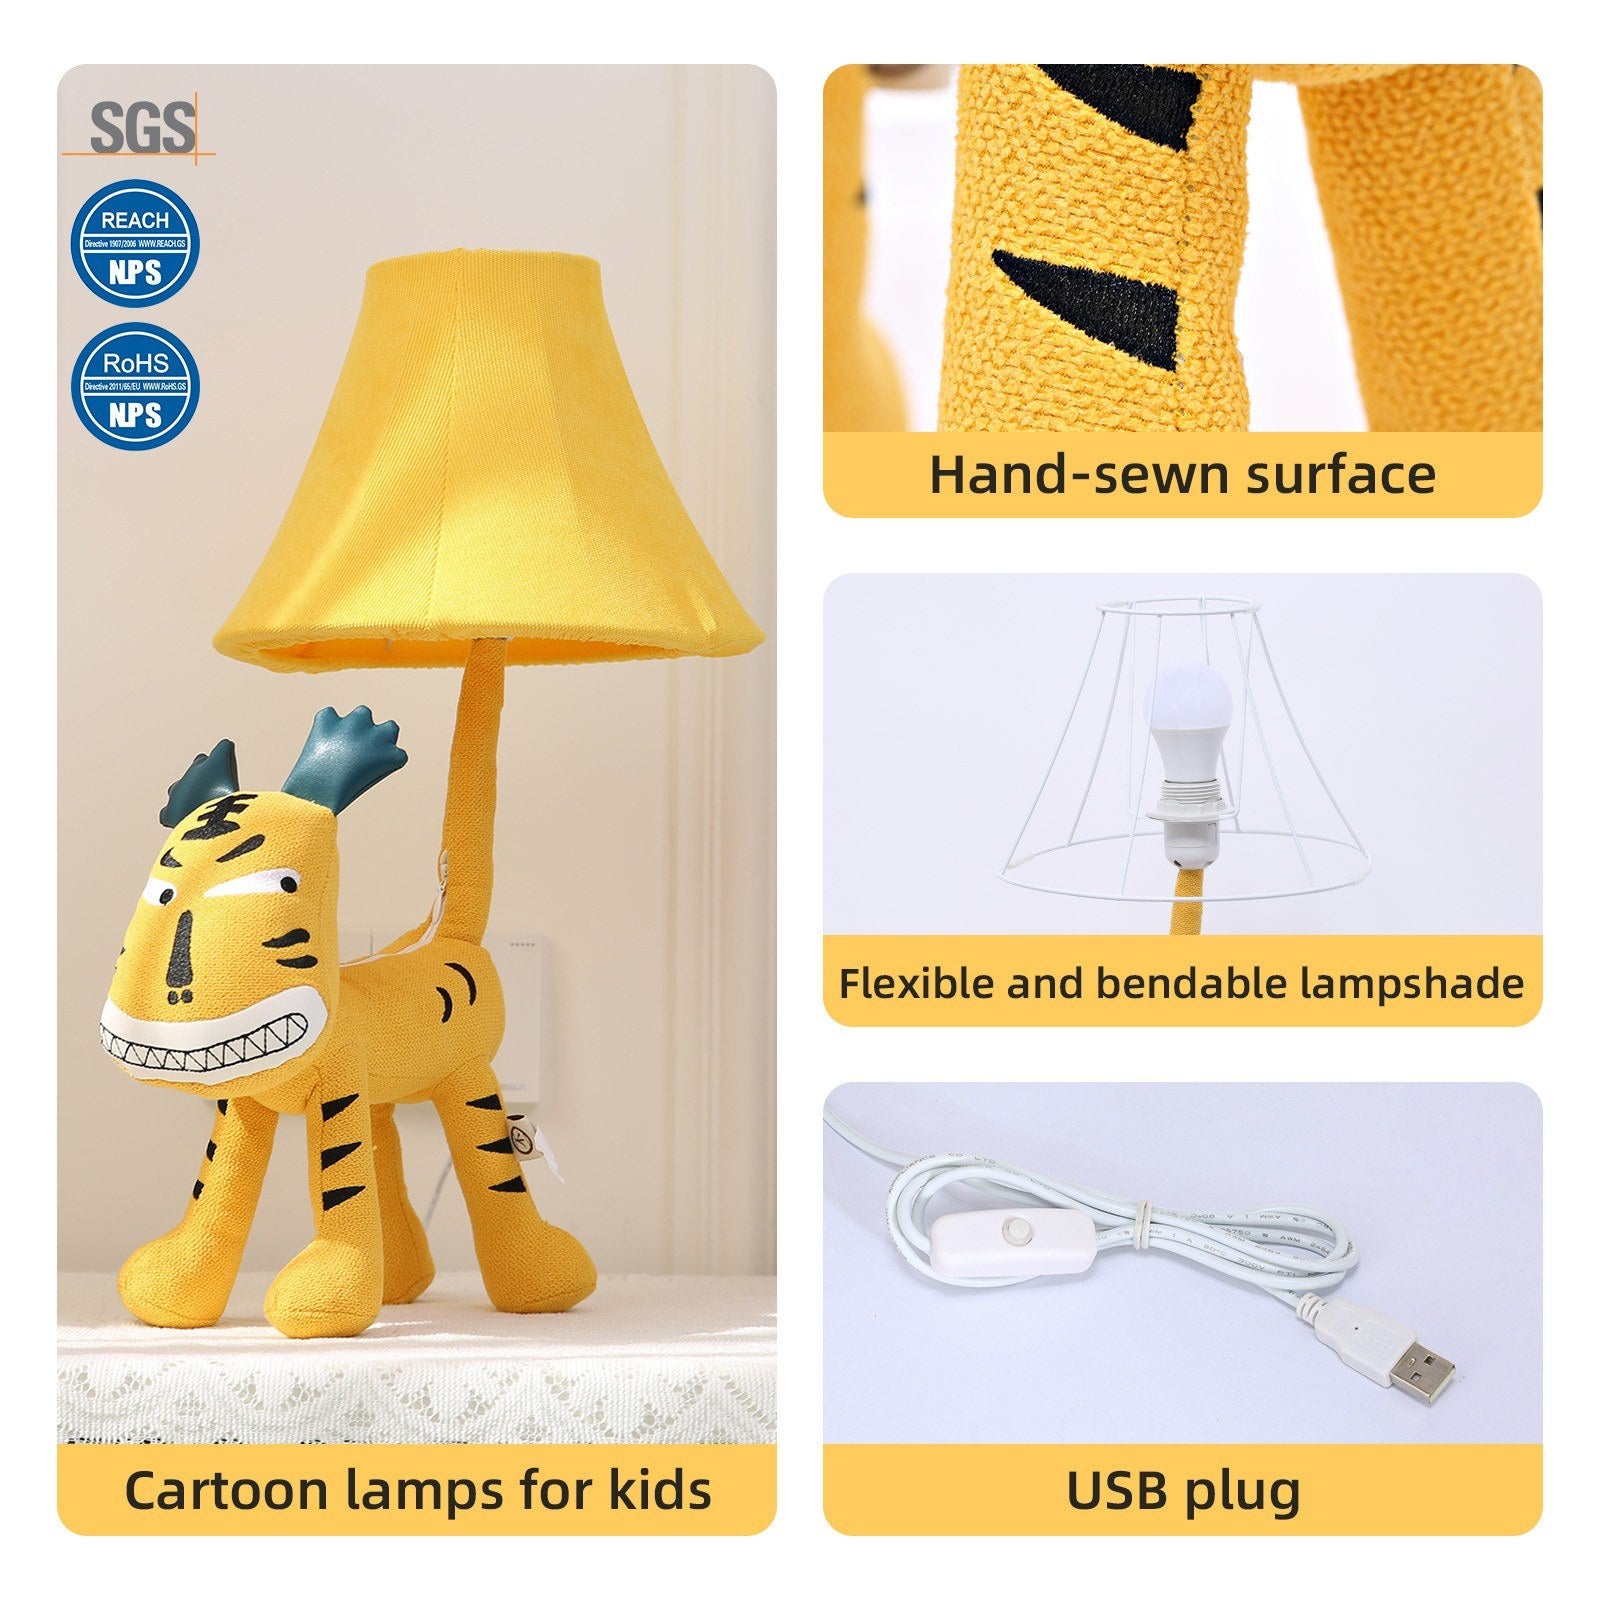 Tiger Lamp is the perfect to bring warmth to your nursery or kidsroom